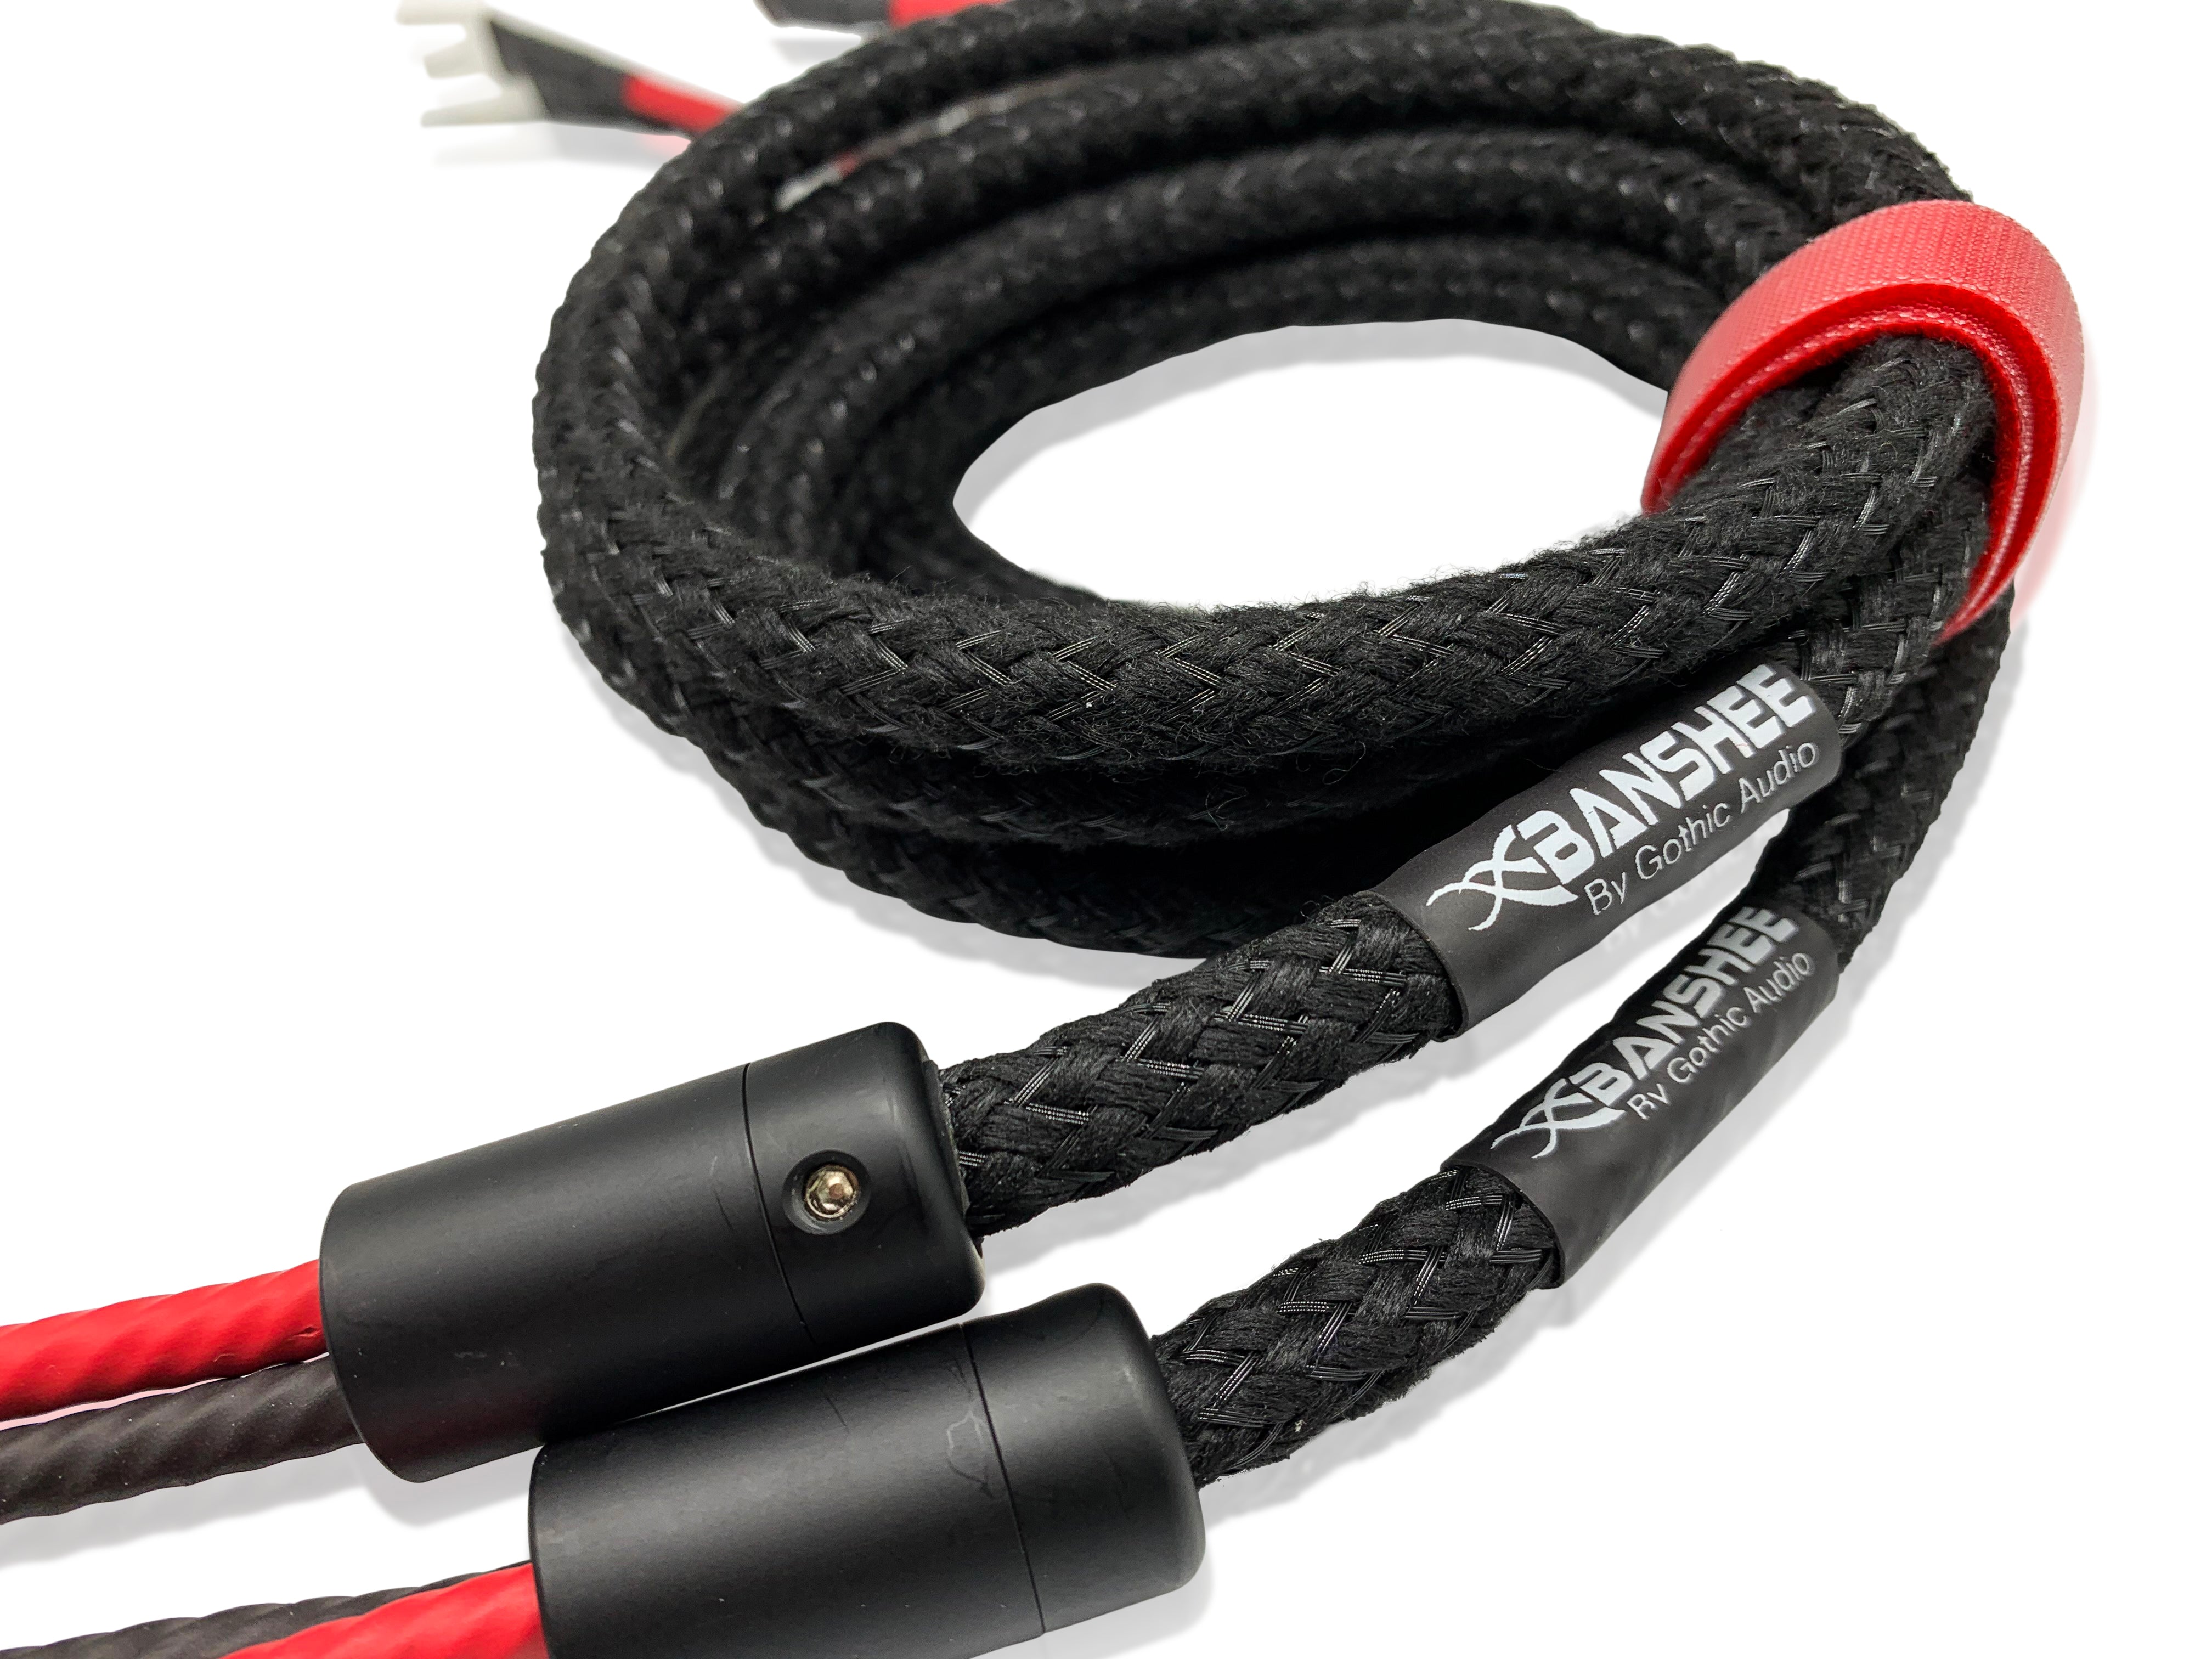 Banshee OCC 5N Pure Silver Speaker Cables